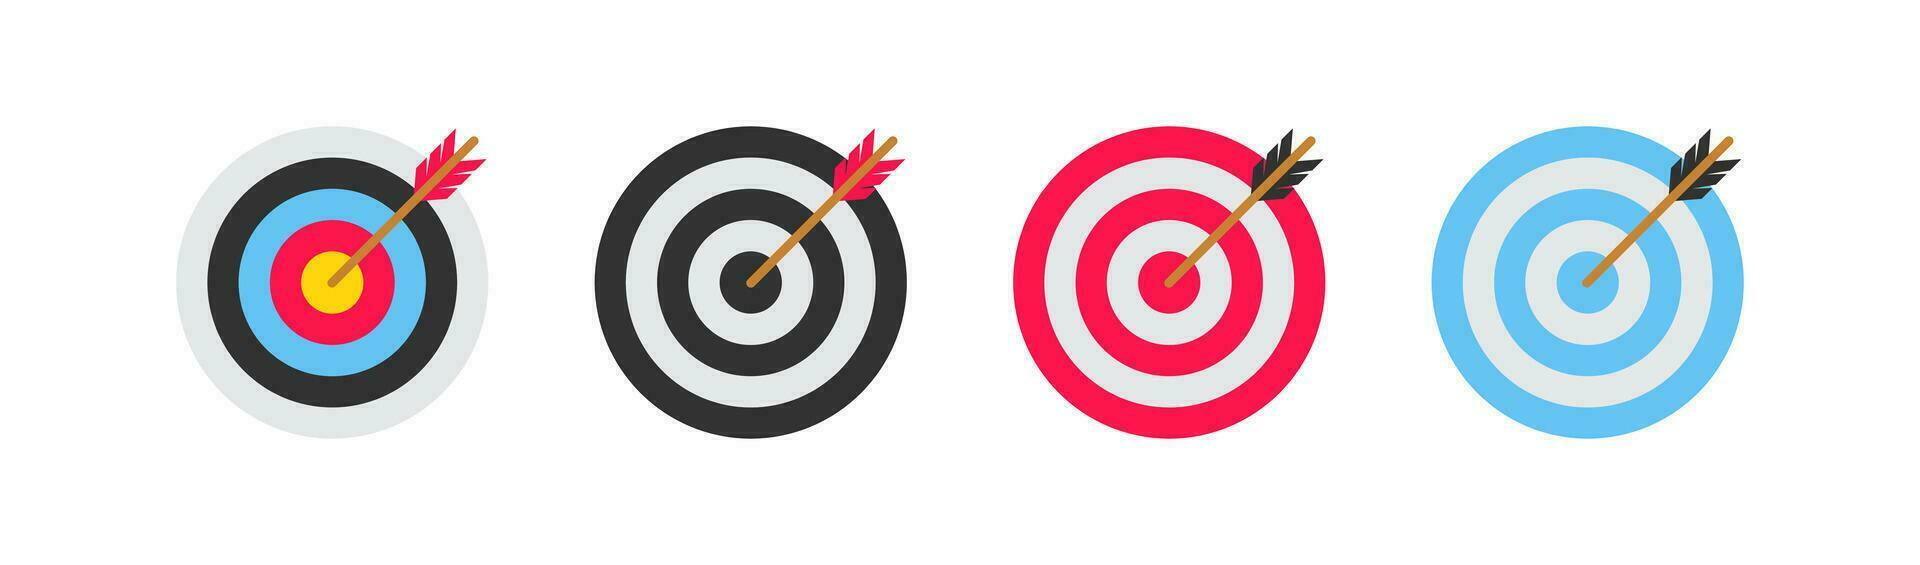 Target arrow icon. Dart goal signs. Aim symbol. Focus on the center of dartboard symbols. Business strategy icons. Black, flat color. Vector sign.